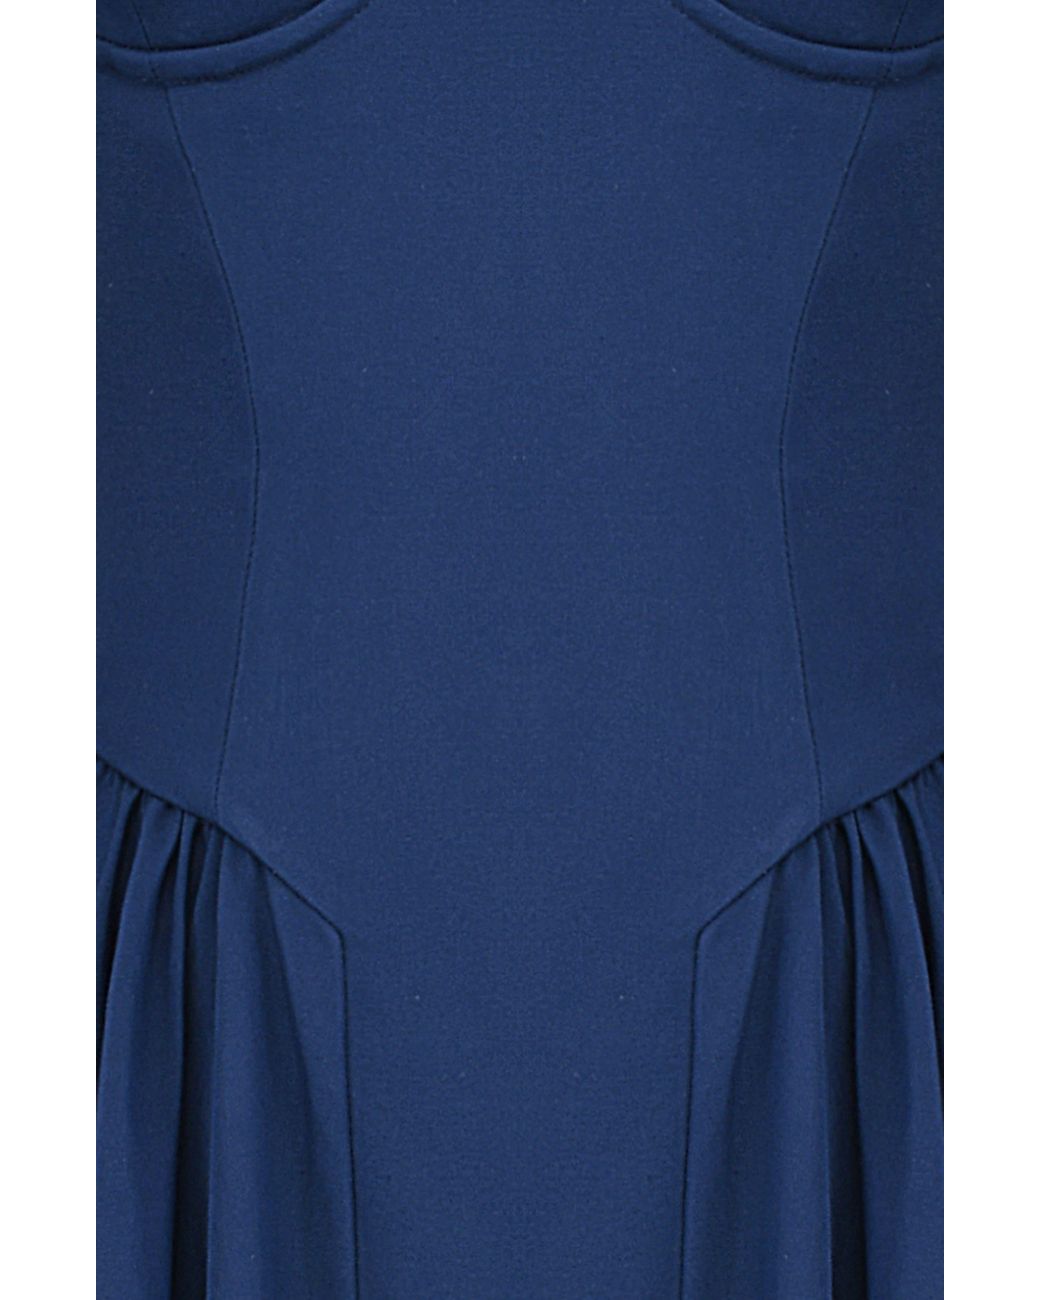 House Of Cb Samaria Corset Fit & Flare Dress in Blue